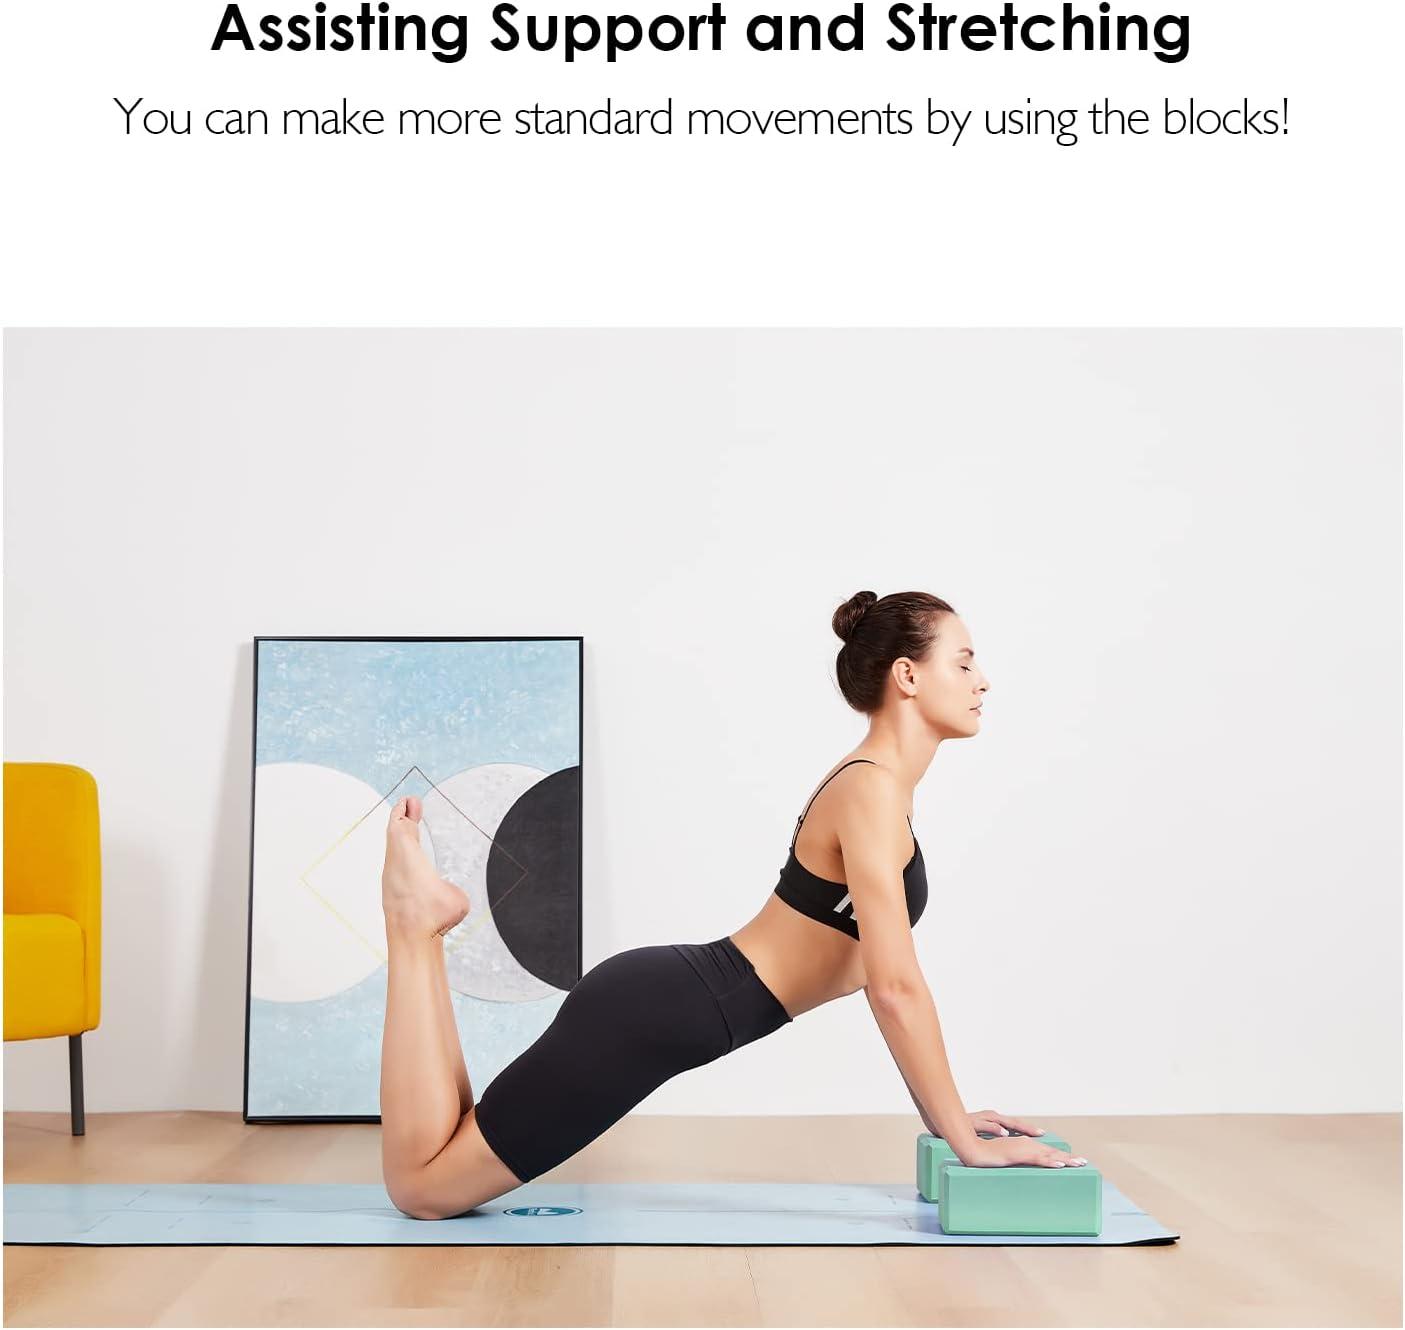 REEHUT Yoga Blocks,High Density EVA Foam Blocks to Support and Deepen  Poses, Improve Strength and Aid Balance and Flexibility - Lightweight, Odor  Resistant